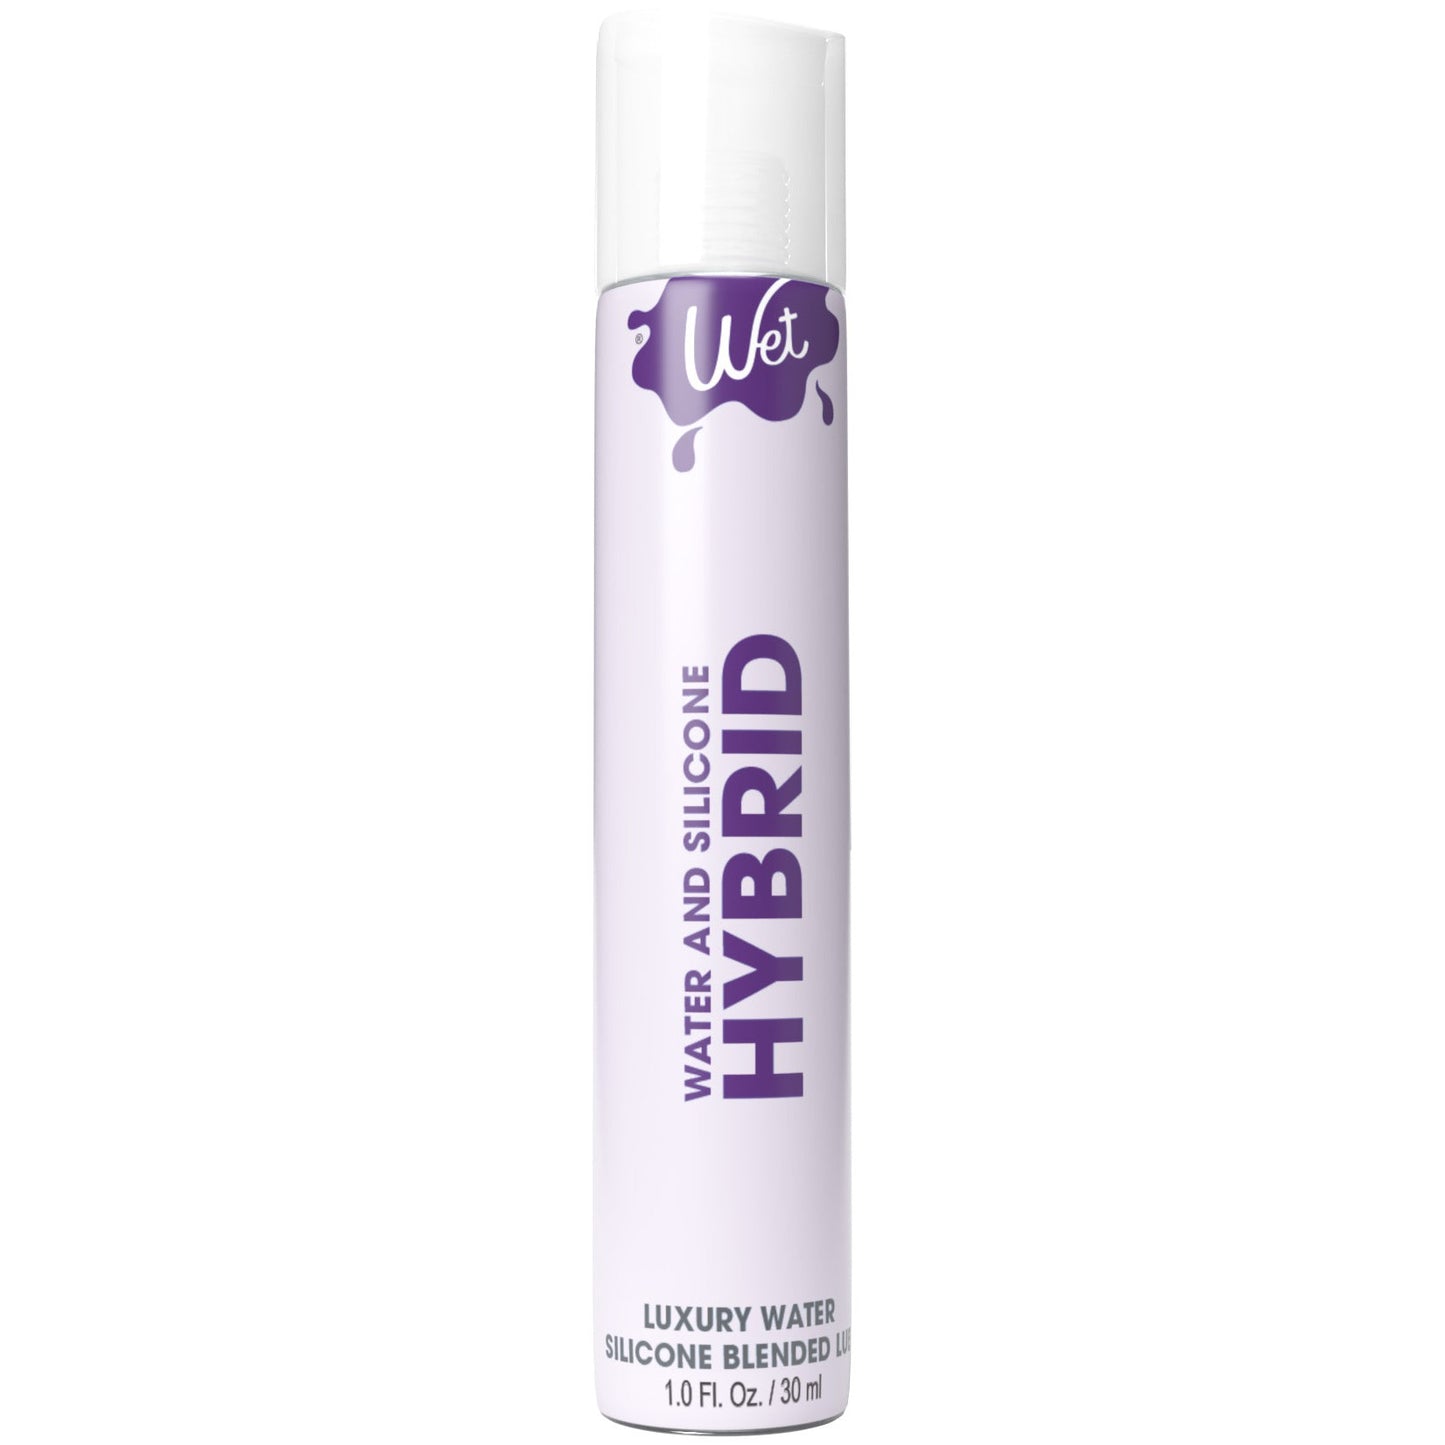 Wet Hybrid Luxury Water/silicone Blend Based  Lubricant 1 Oz